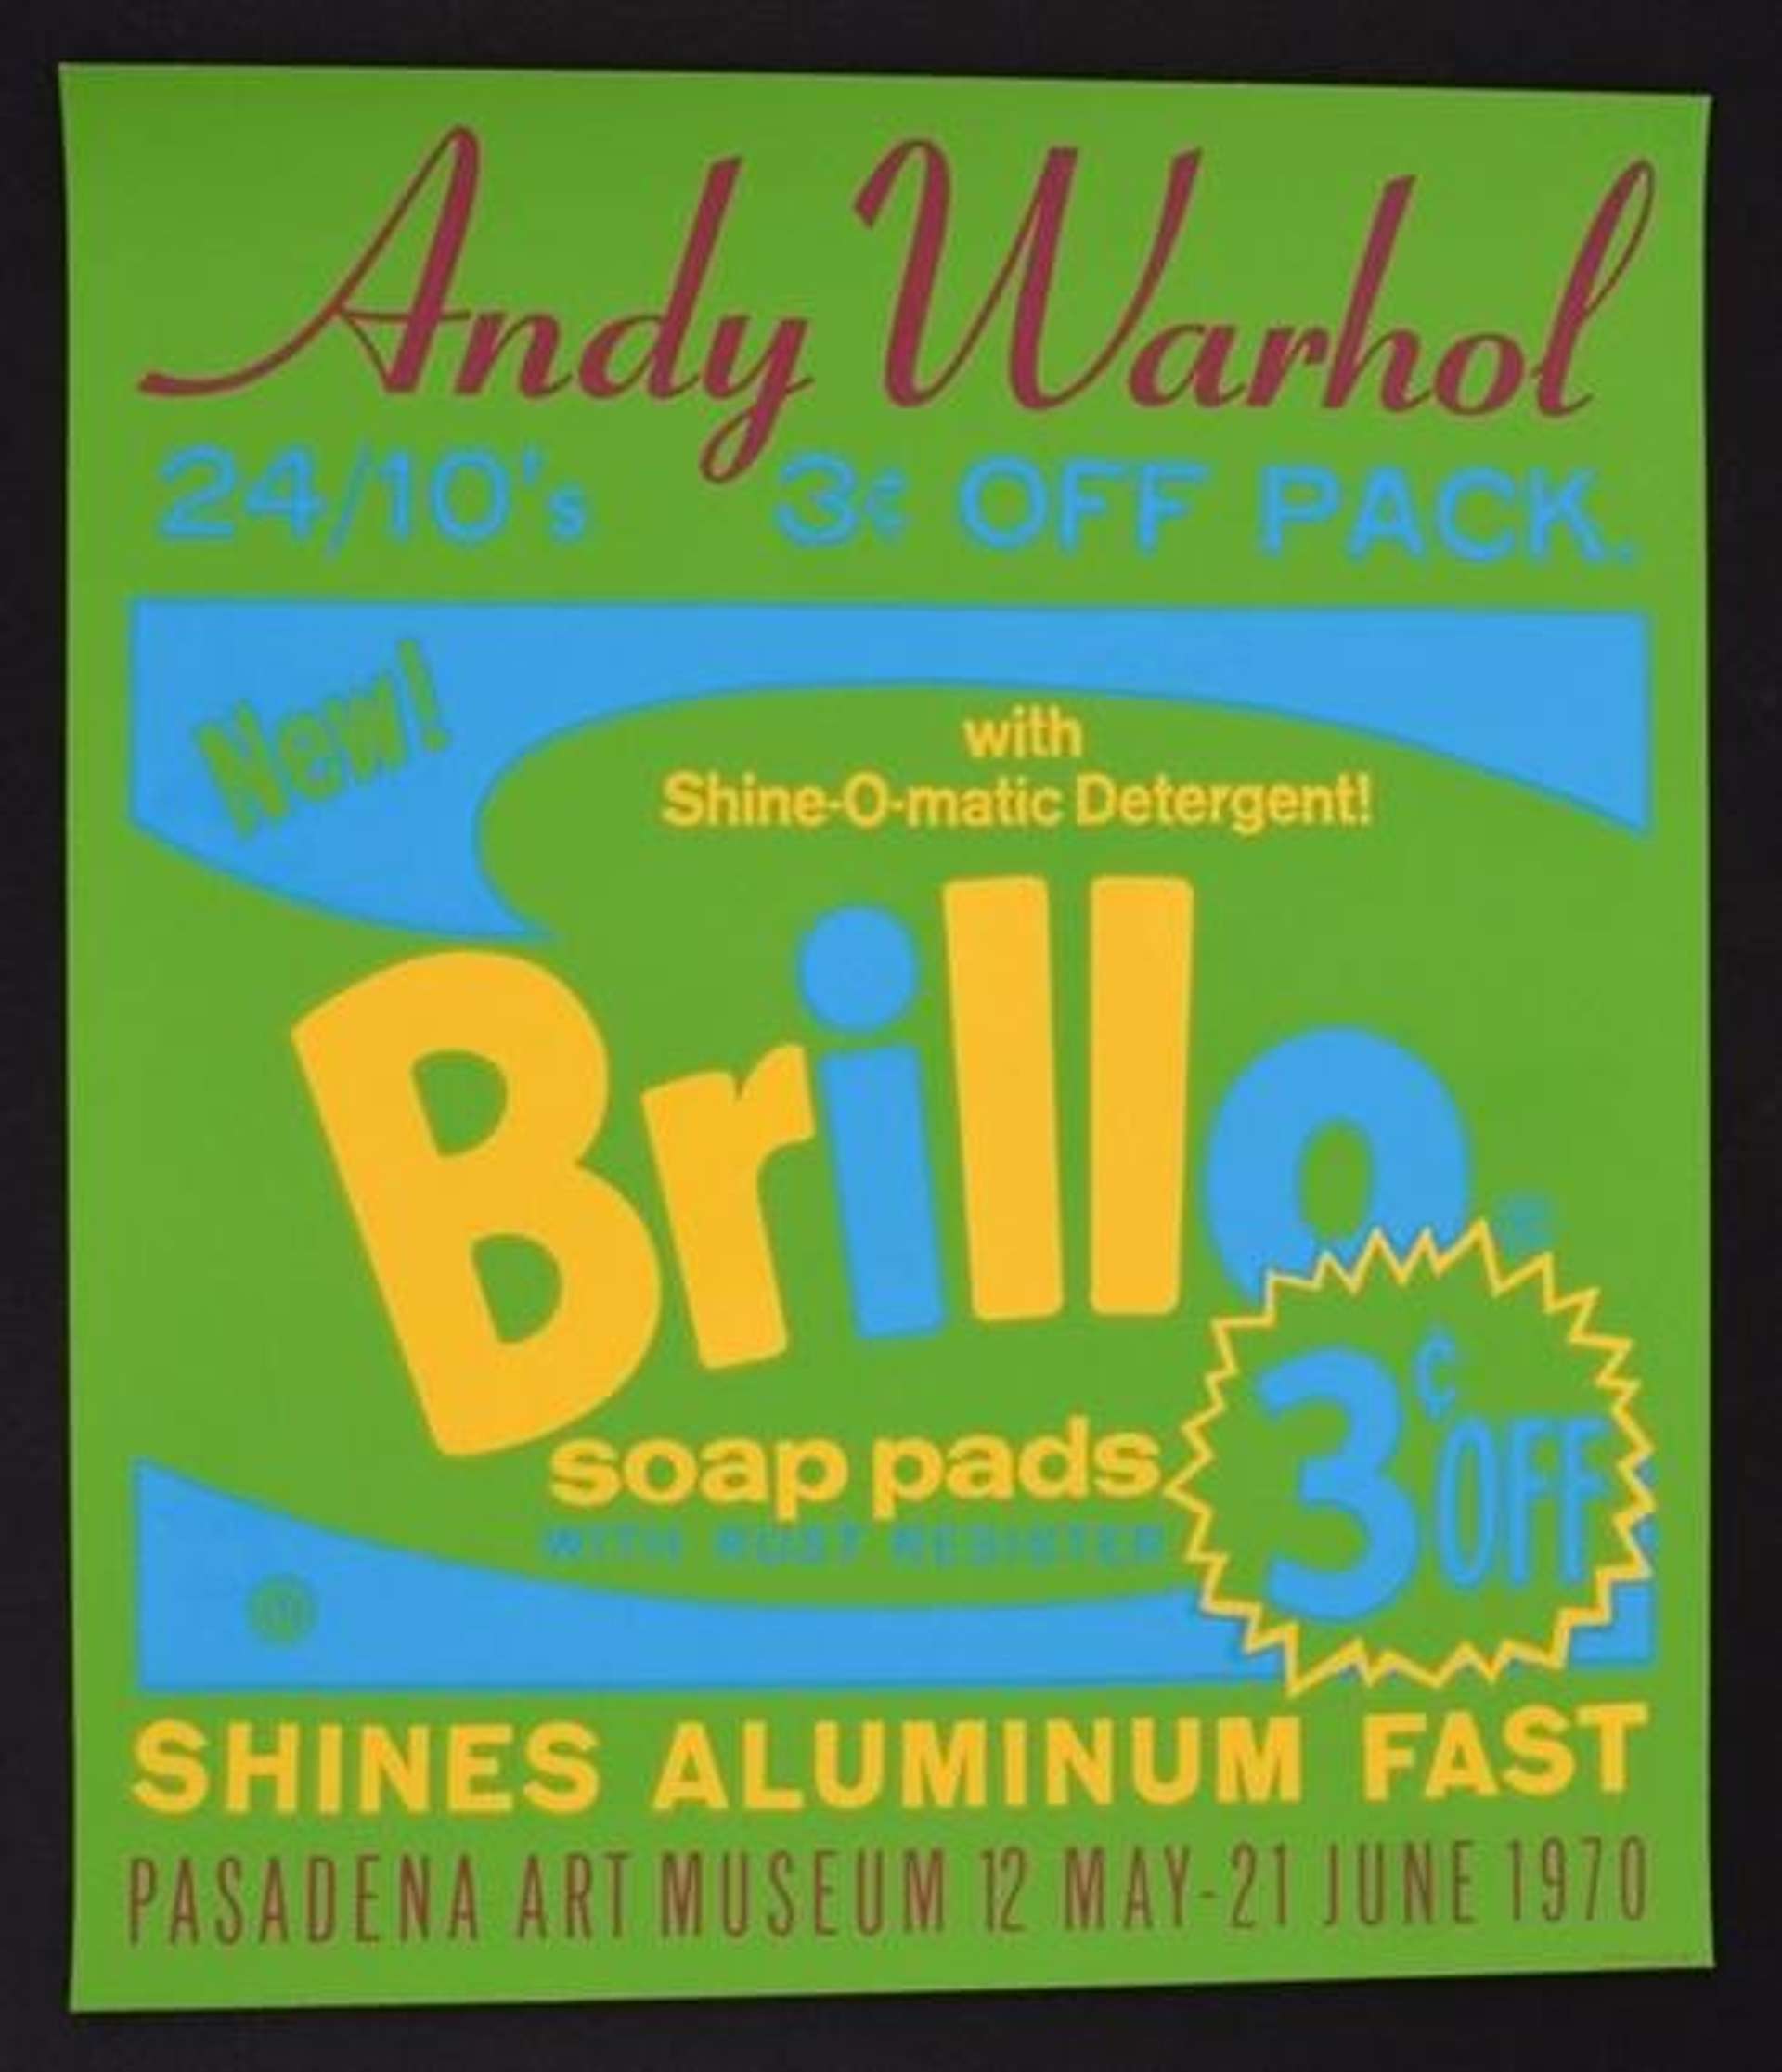 Brillo Soap Pads, Pasadena Art Museum Poster by Andy Warhol